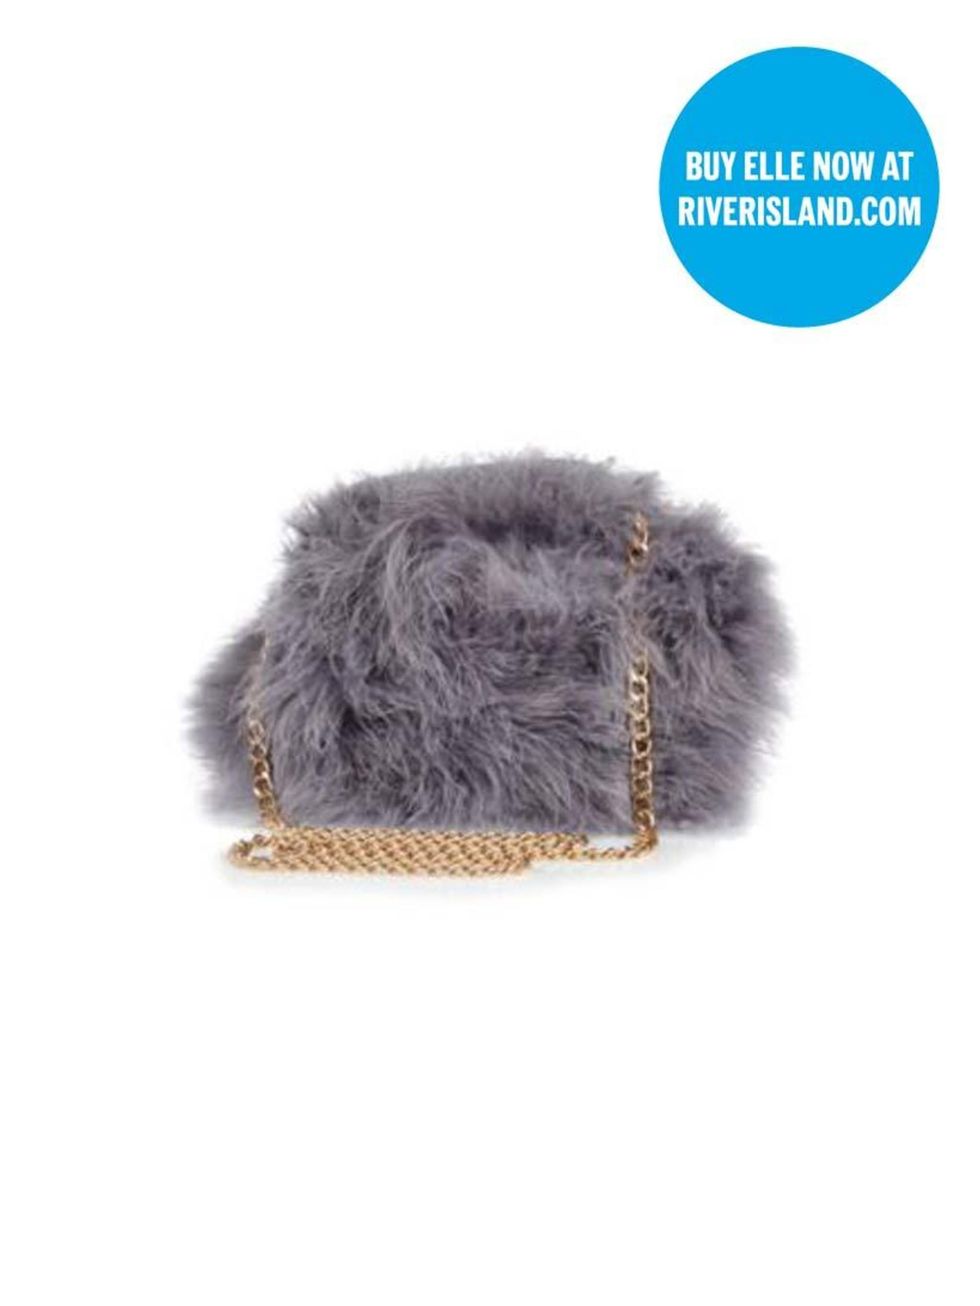 <p>Associate Health & Beauty Editor Amy Lawrenson couldn't resist this fuzzy little chap - and while she's at River Island, she can <a href="http://www.elleuk.com/fashion/news/River-Island-ELLEfashioncupboard-video-the-journey-of-an-edit">pick up a copy o